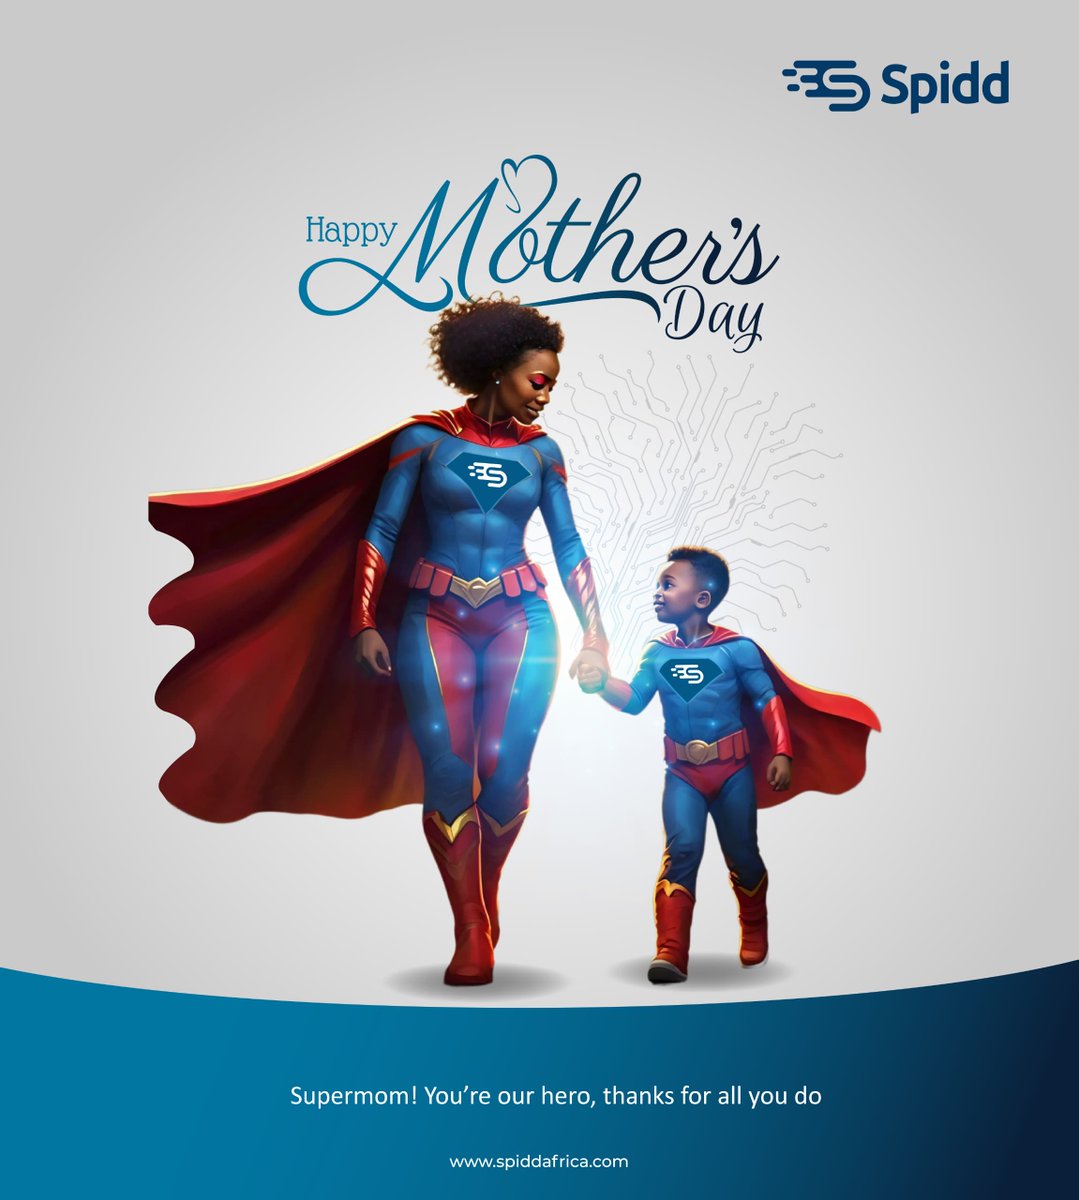 You're our everyday hero, Mom! Thanks for all you do. #HappyMothersDay #SpiddLovesMoms